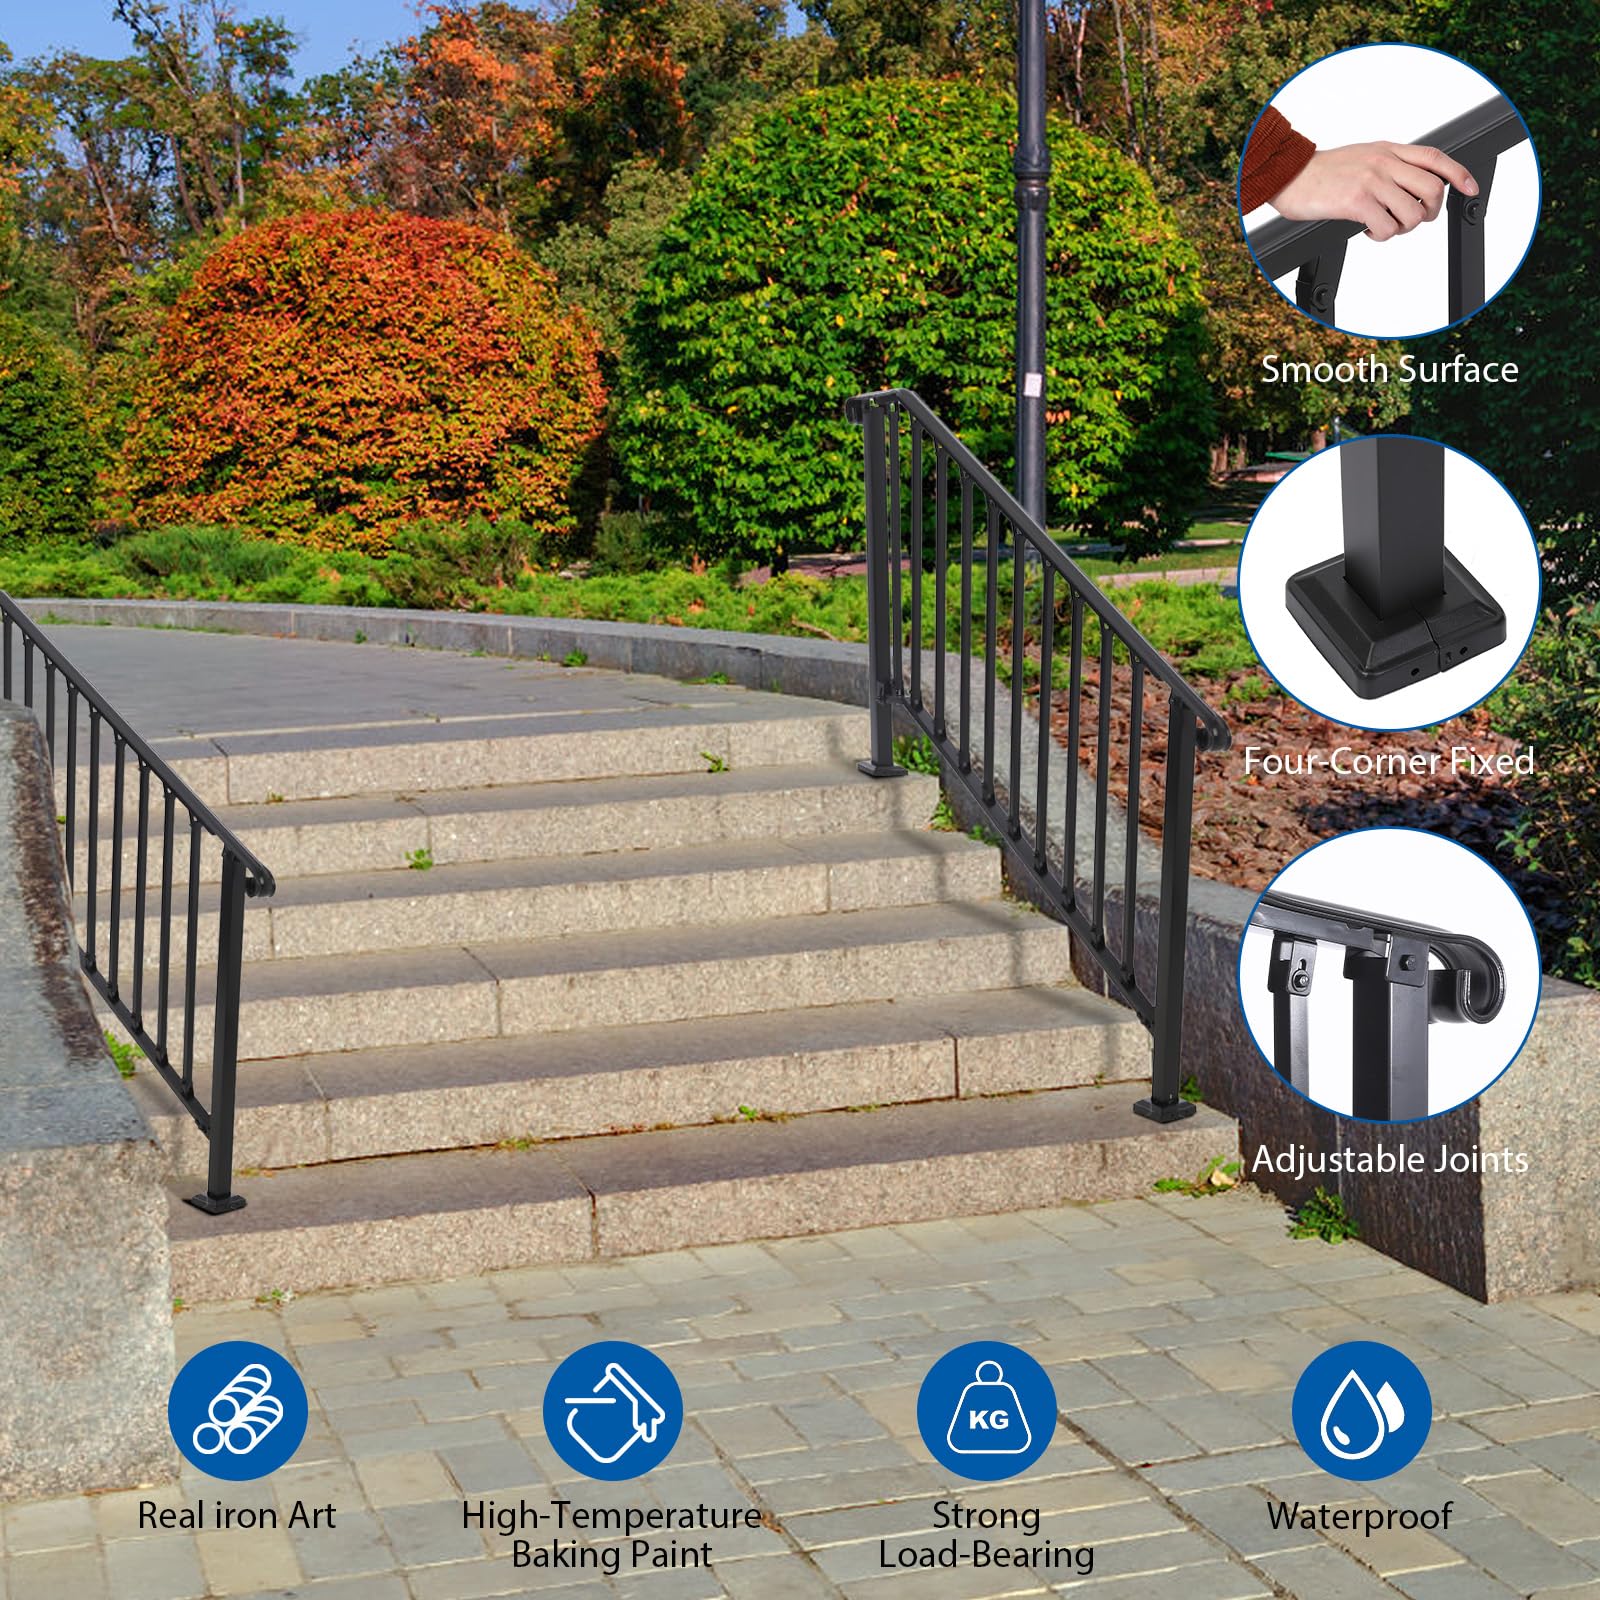 Adjustable Handrail 4-5 Steps, Kit Included, for Outdoor Stairs - GARVEE